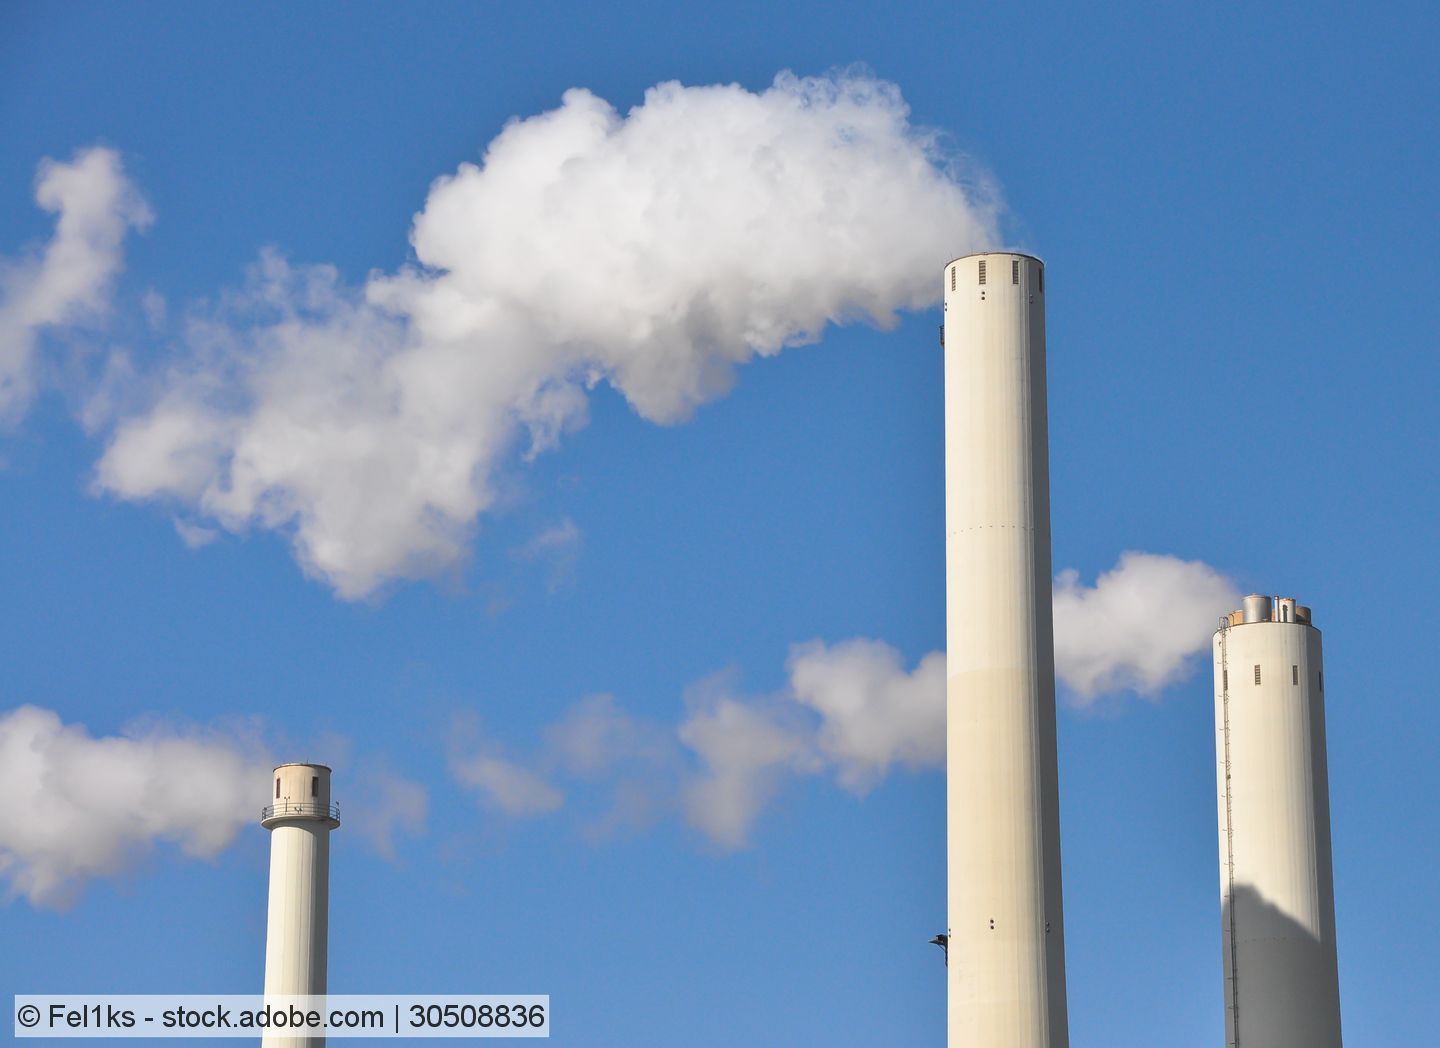 Stock photo of three tall stacks with steam plumes